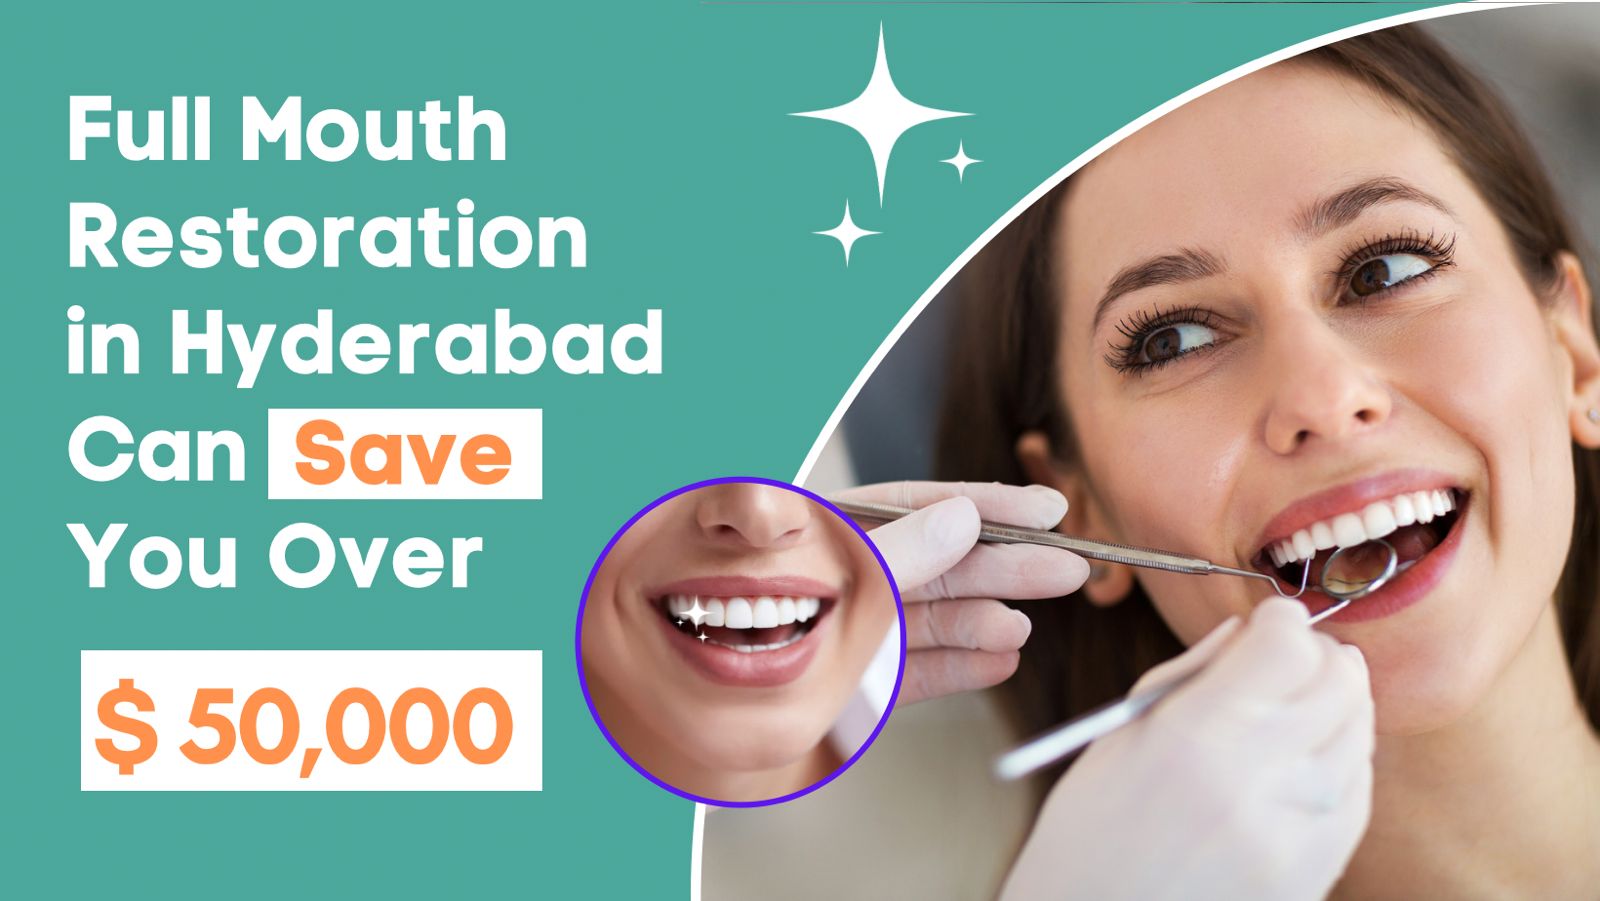 Full Mouth Restoration in Hyderabad Can Save You Over $50k!